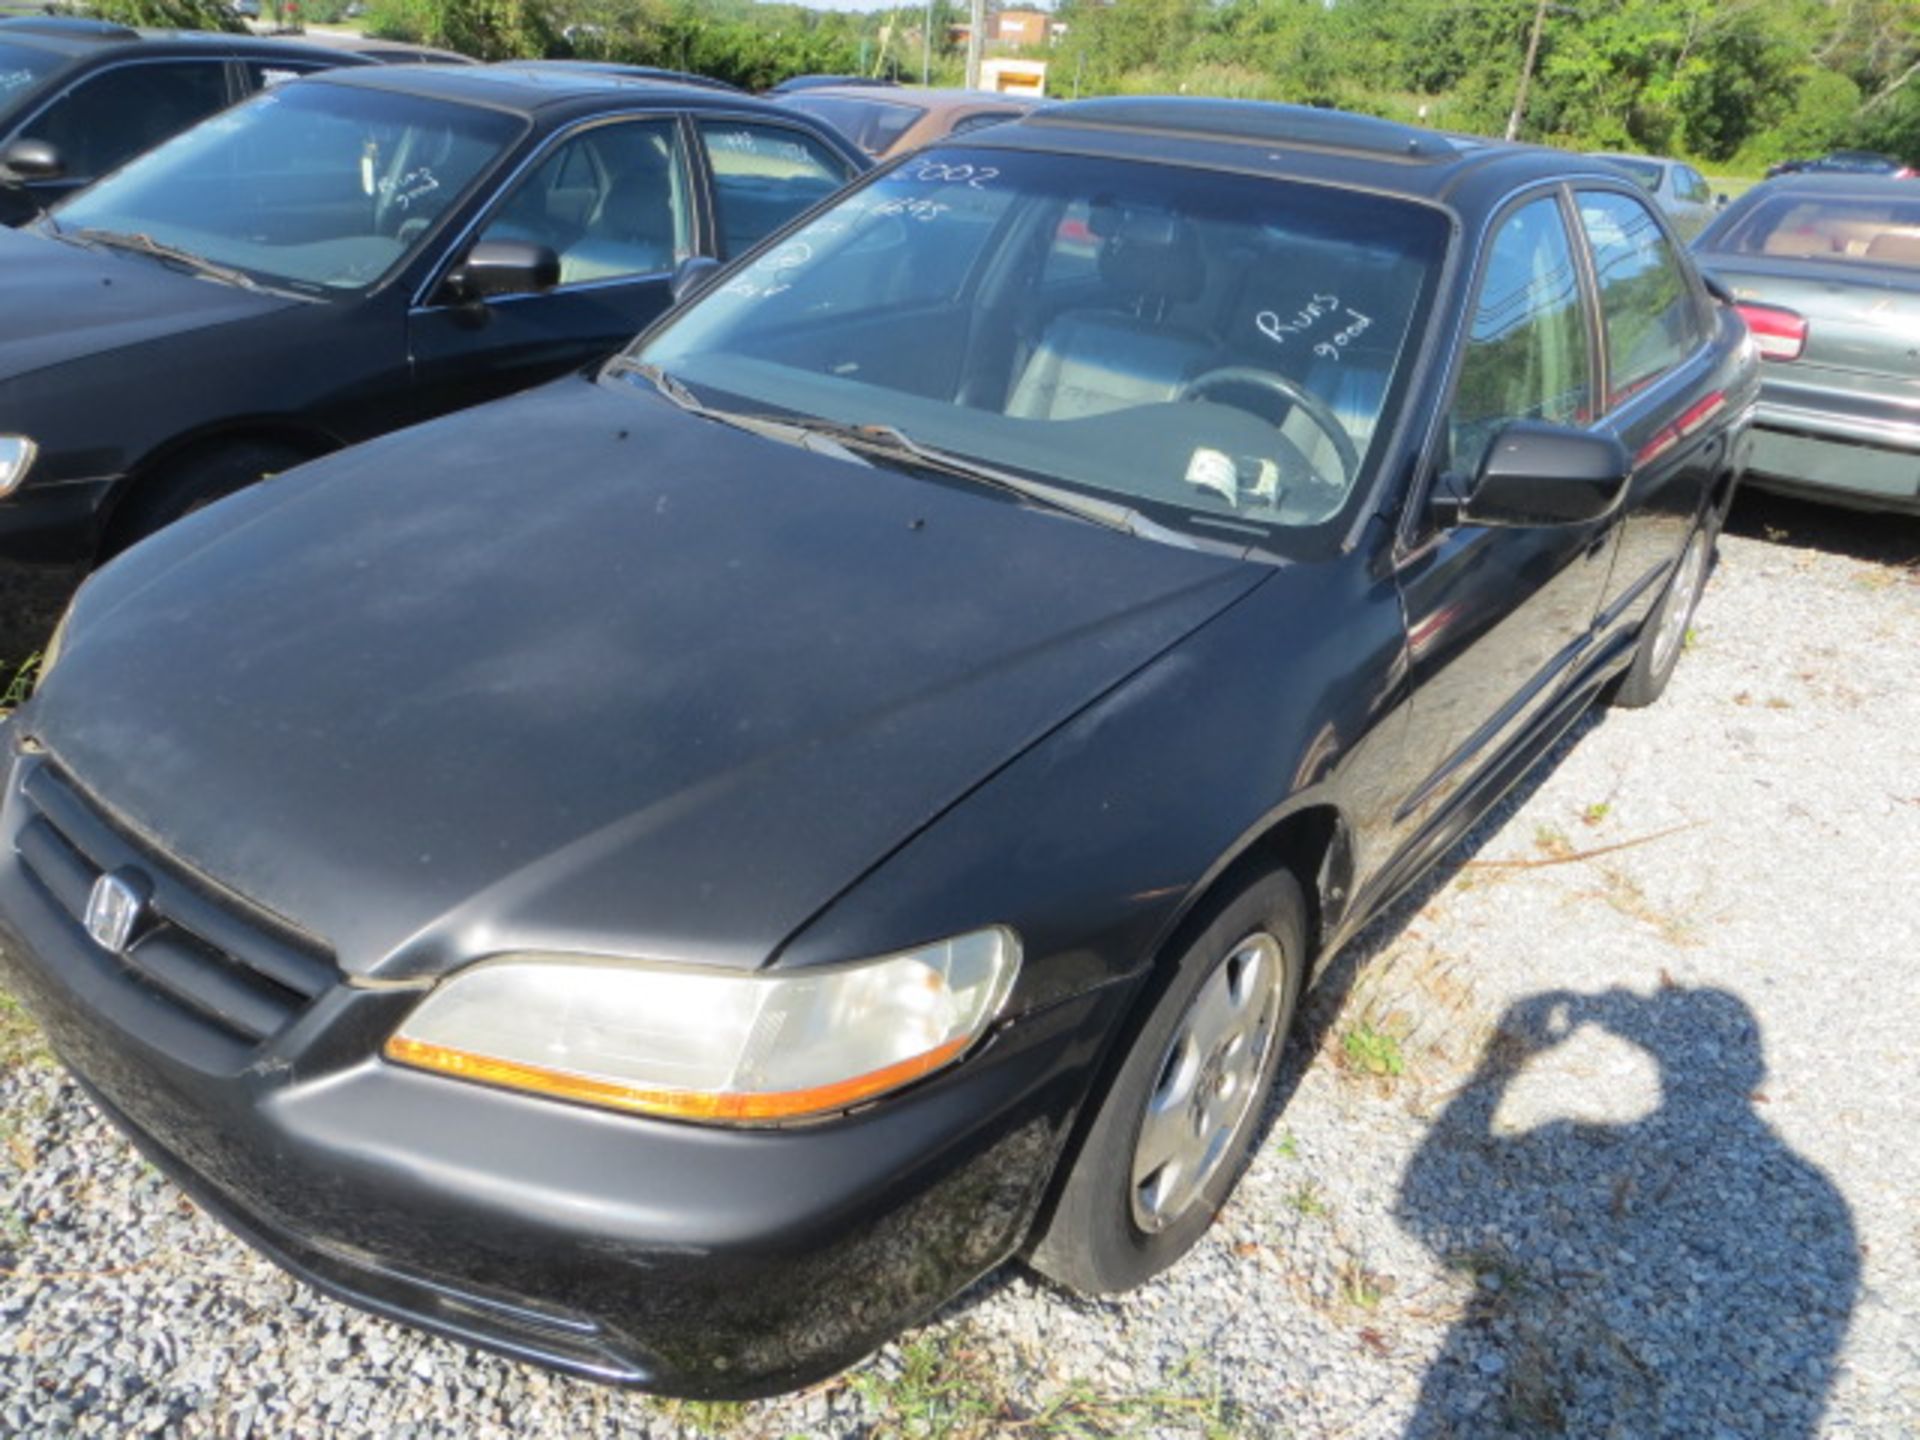 2002 Honda Accord-BAD PAINT 194000 MILES,VIN 1HGCG16532A046695, SOLD WITH GOOD TRANSFERABLE TITLE, - Image 2 of 3